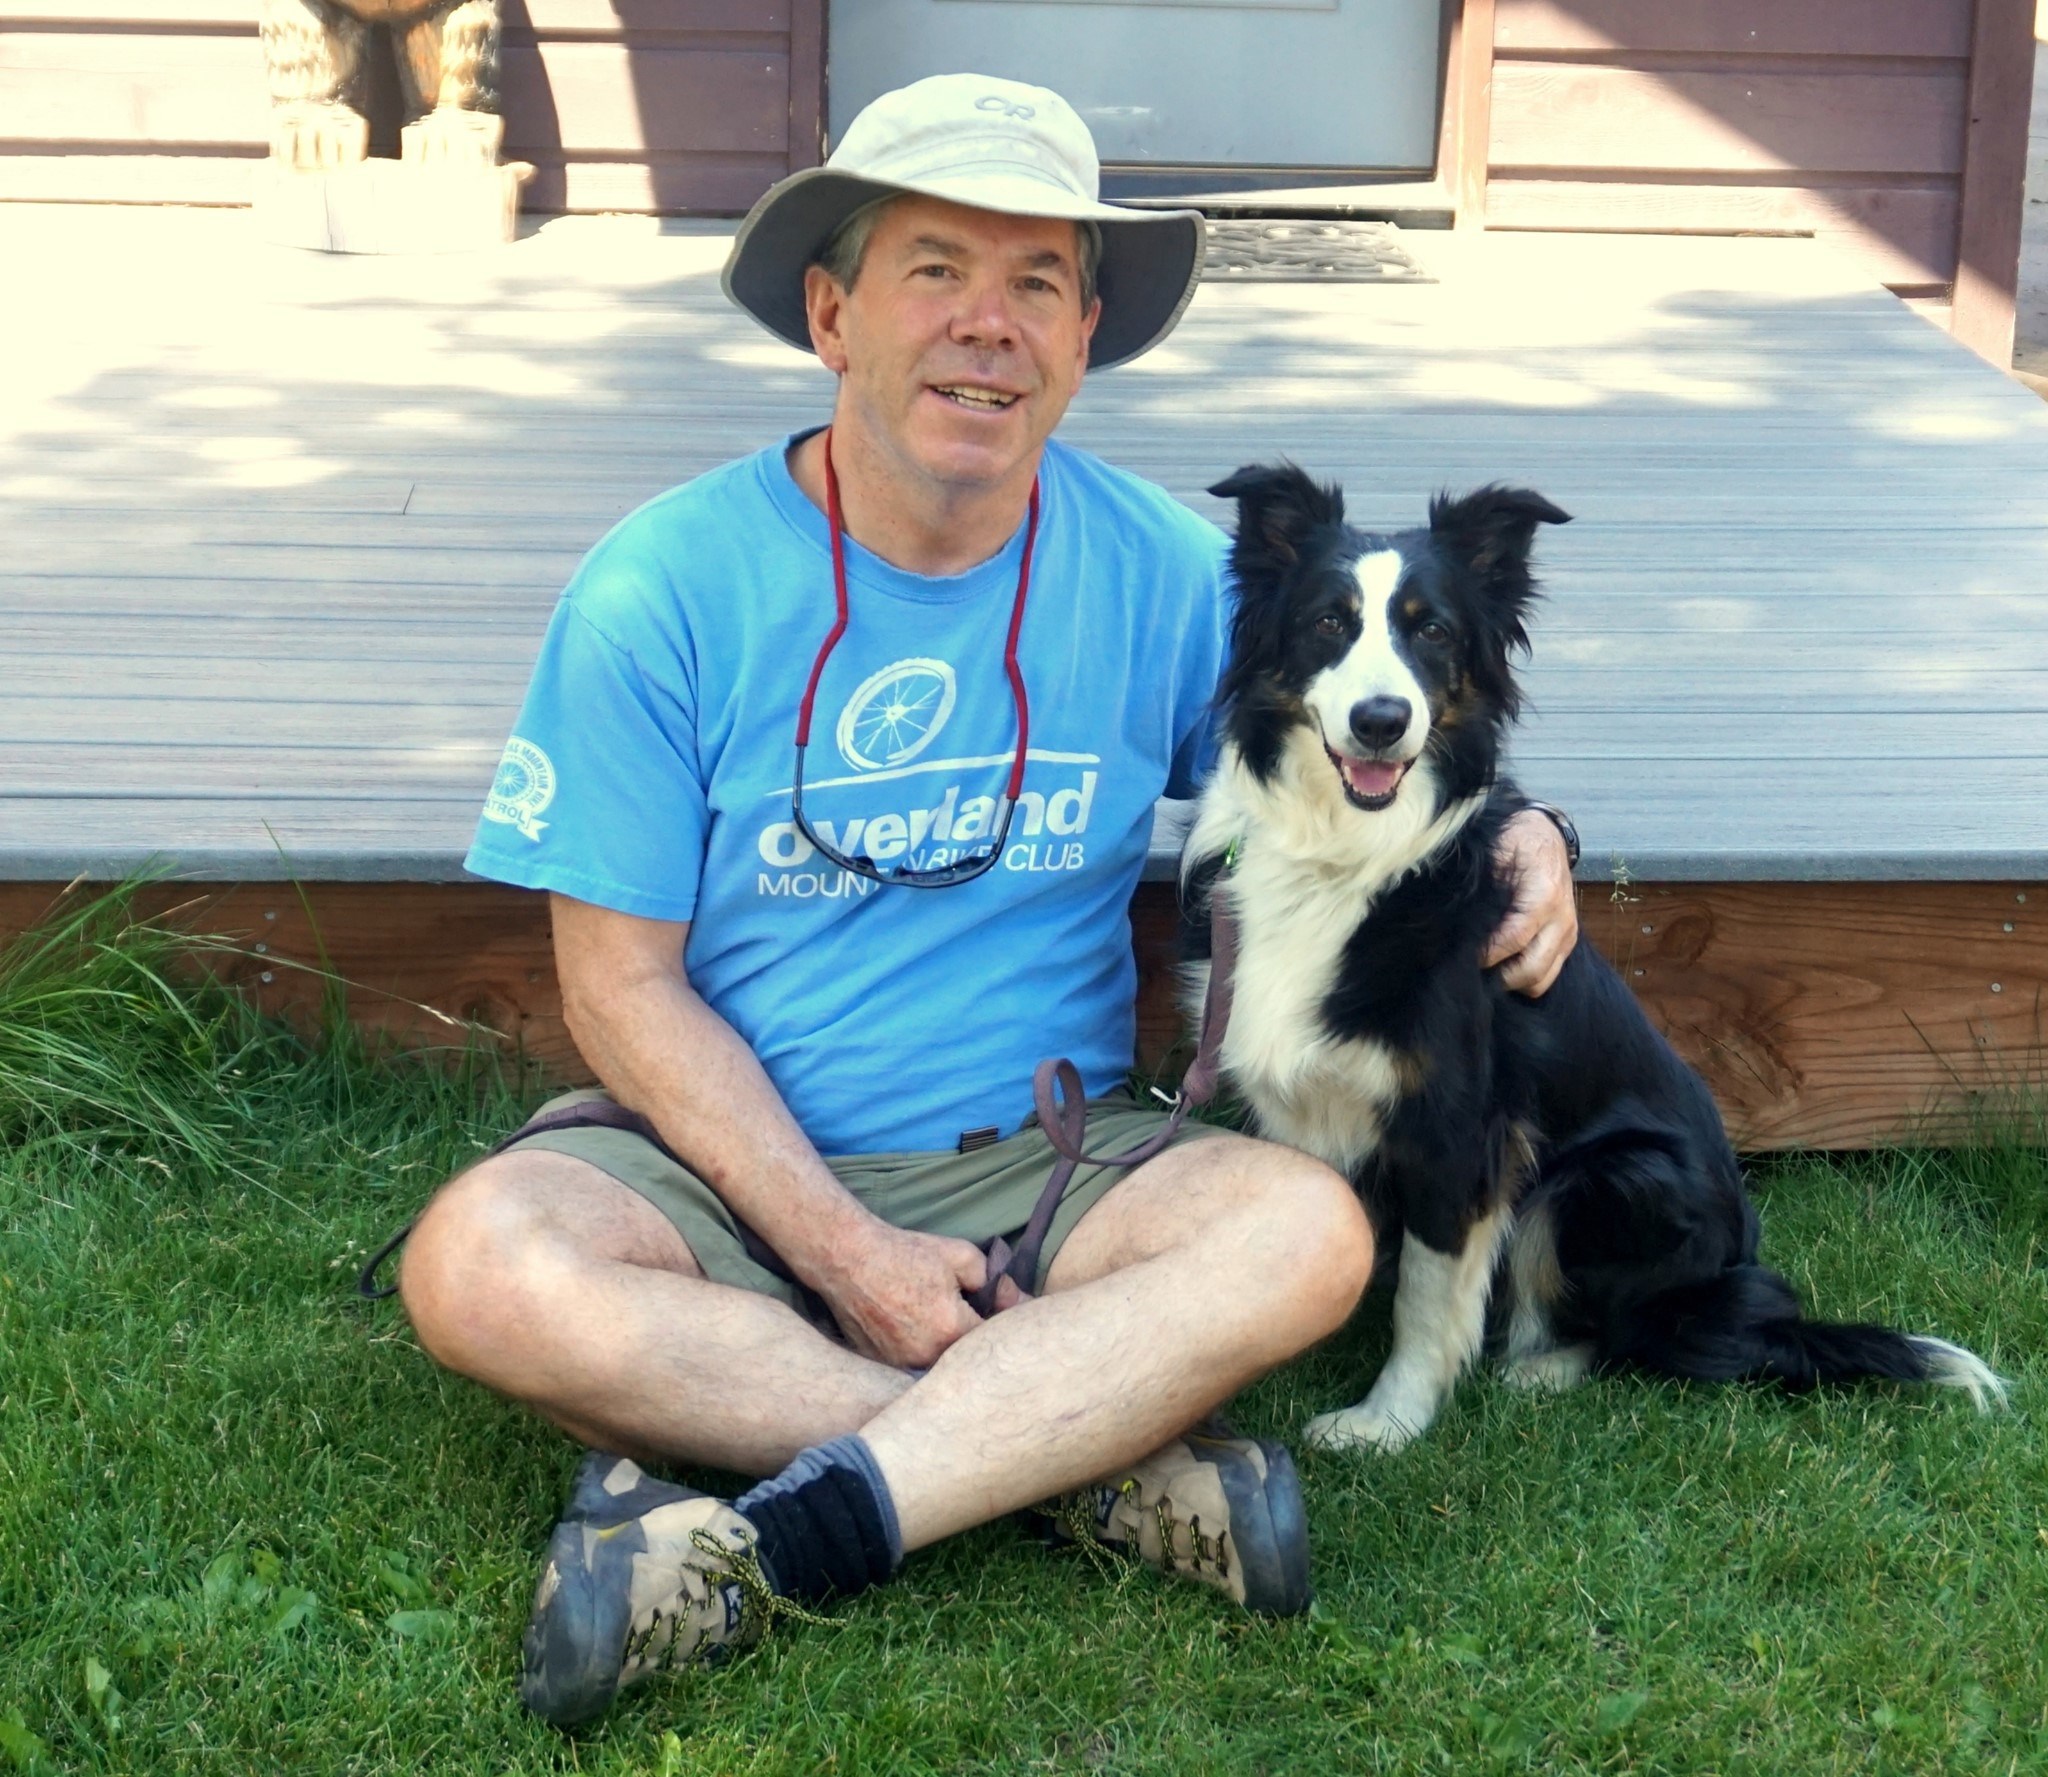 Eric was relieved to be reunited with his border collie. 